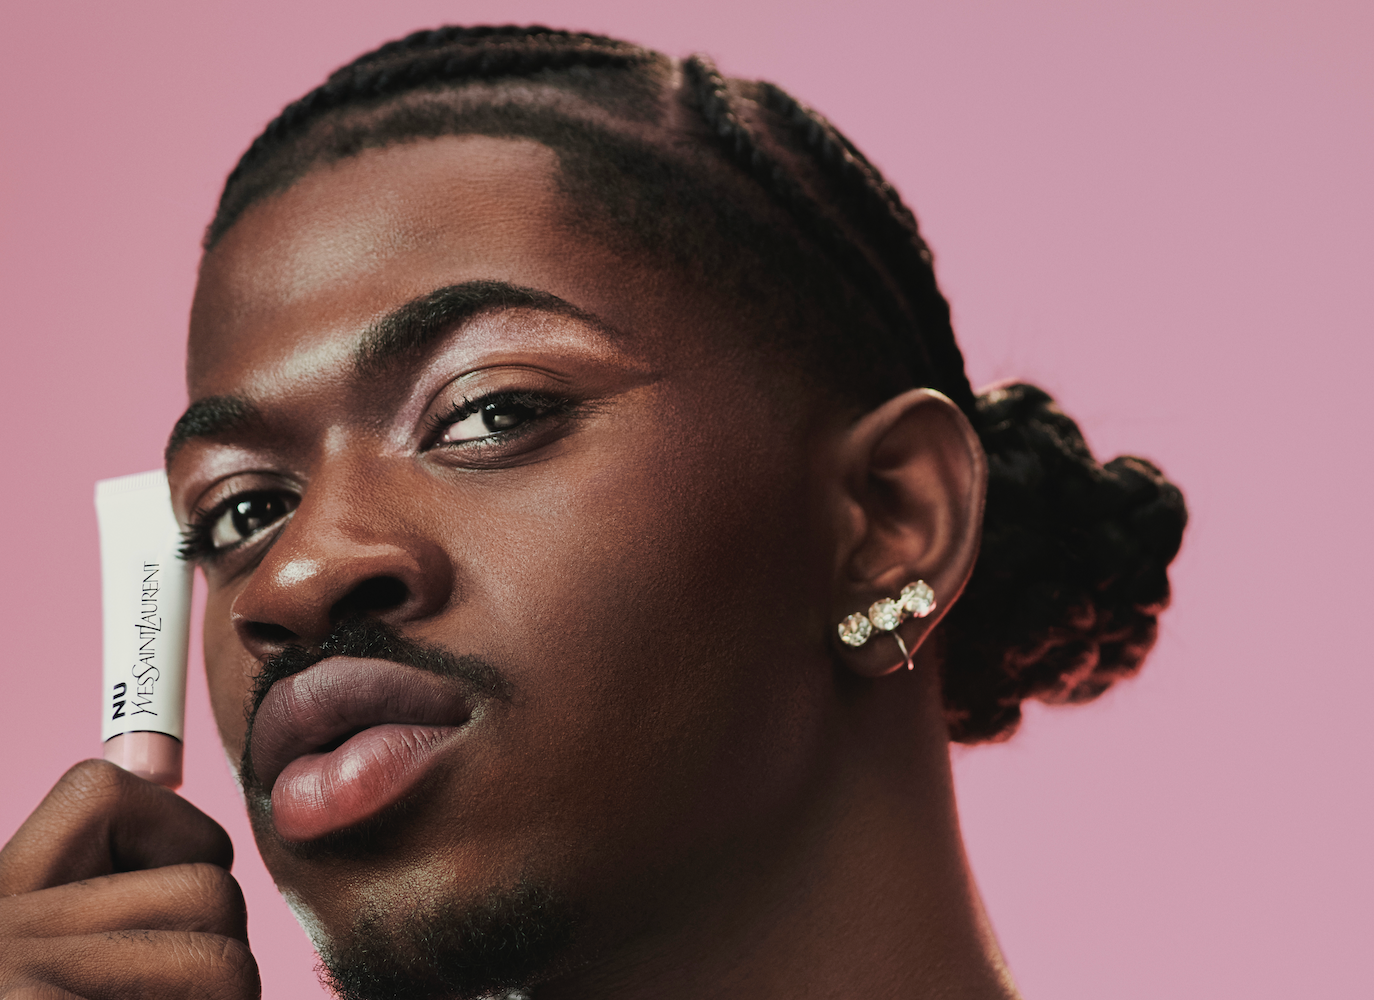 Ysl Beauty S Latest Campaign With Lil Nas X Embraces His Essence